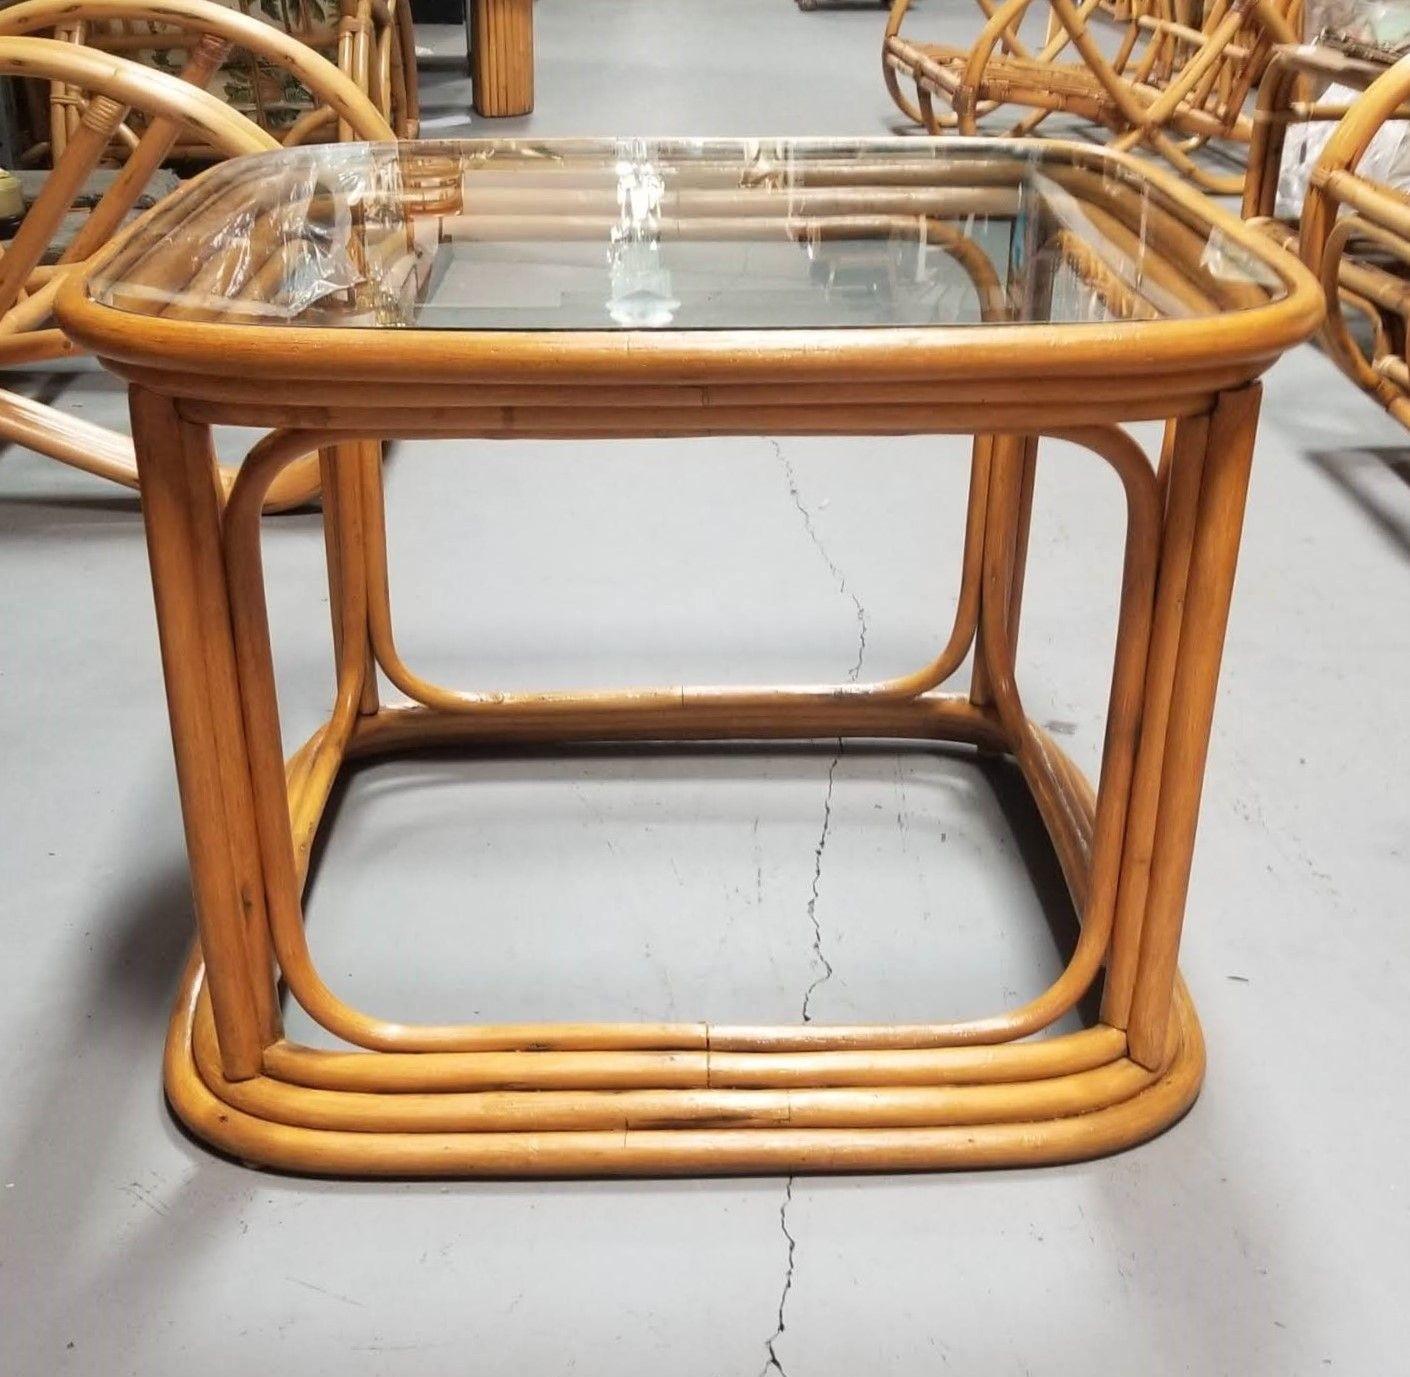 Restored 4-strand rattan legs coffee table with glass tops.

Circa 1950, United States 

We only purchase and sell only the best and finest rattan furniture made by the best and most well-known American designers and manufacturers including:

Ritts